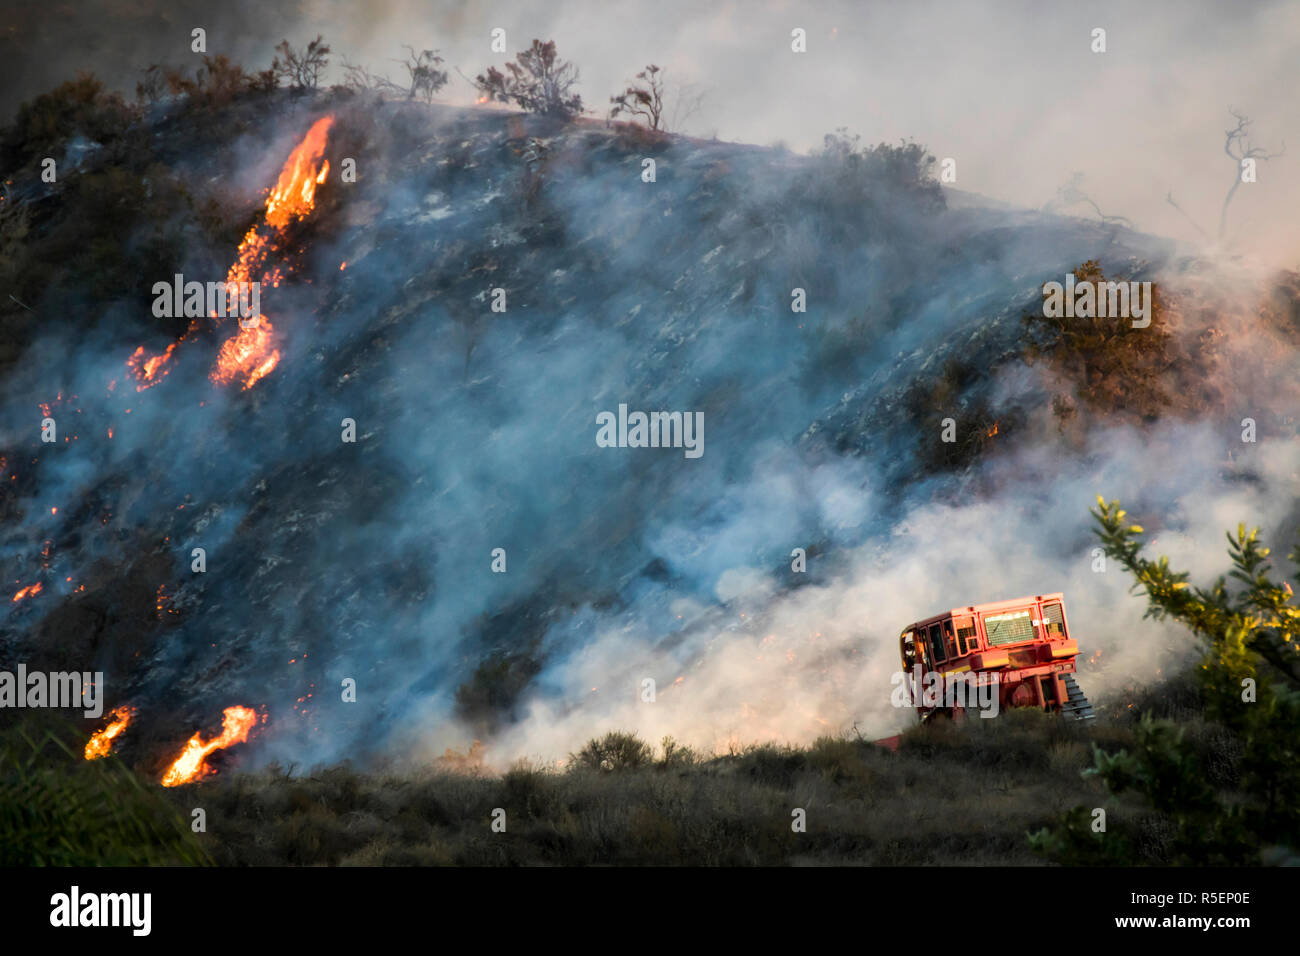 Wildfire flames burn hillside brush with dramatic shapes and color in California's Woolsey Fire.  Bulldozer in foreground during firefight. Stock Photo